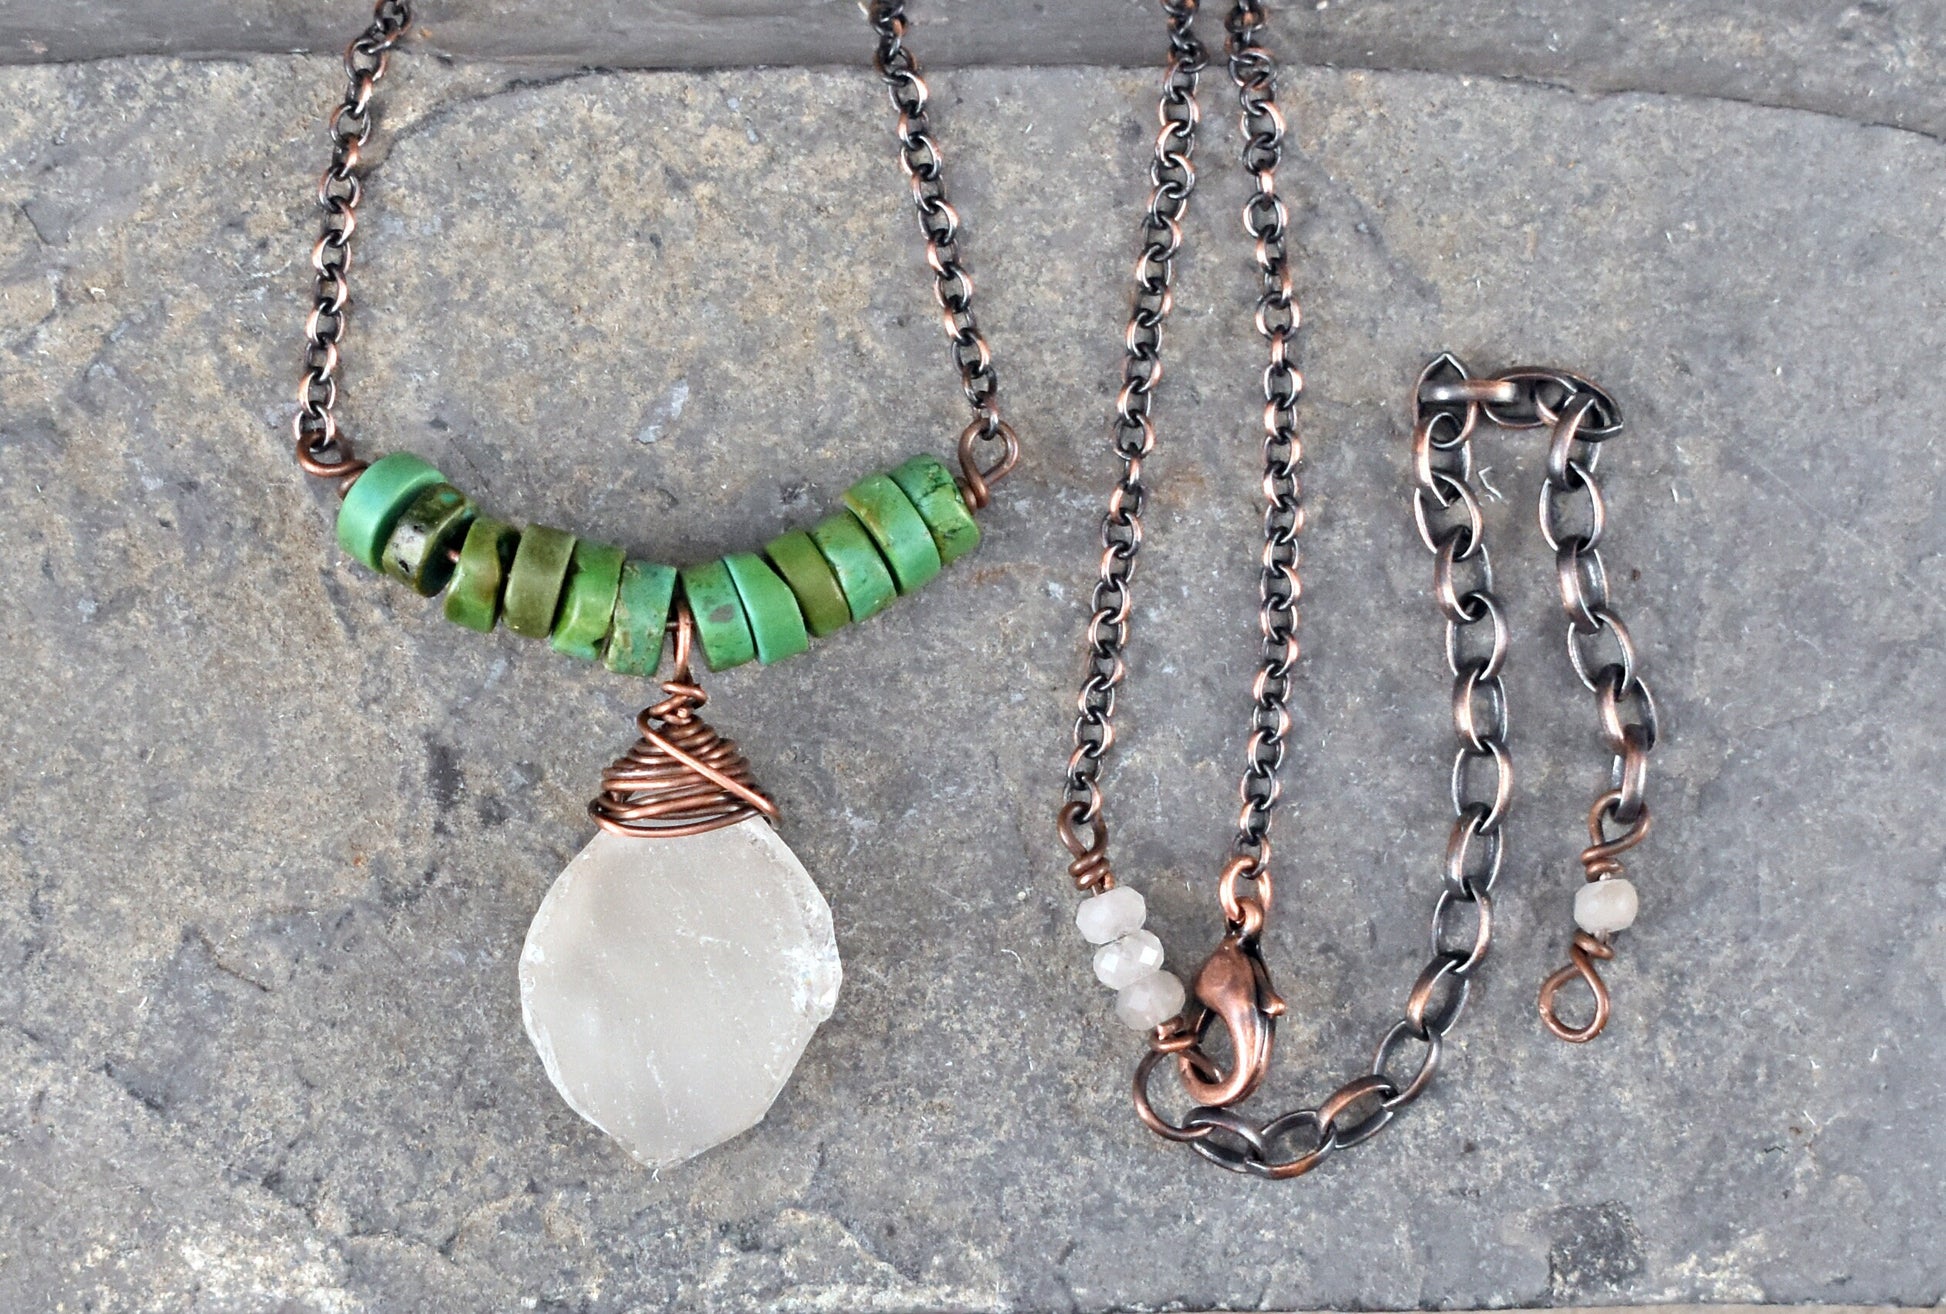 Raw Quartz Teardrop Necklace, Rustic Copper Green Turquoise Pendant, Natural Rough Stone Jewelry Handmade